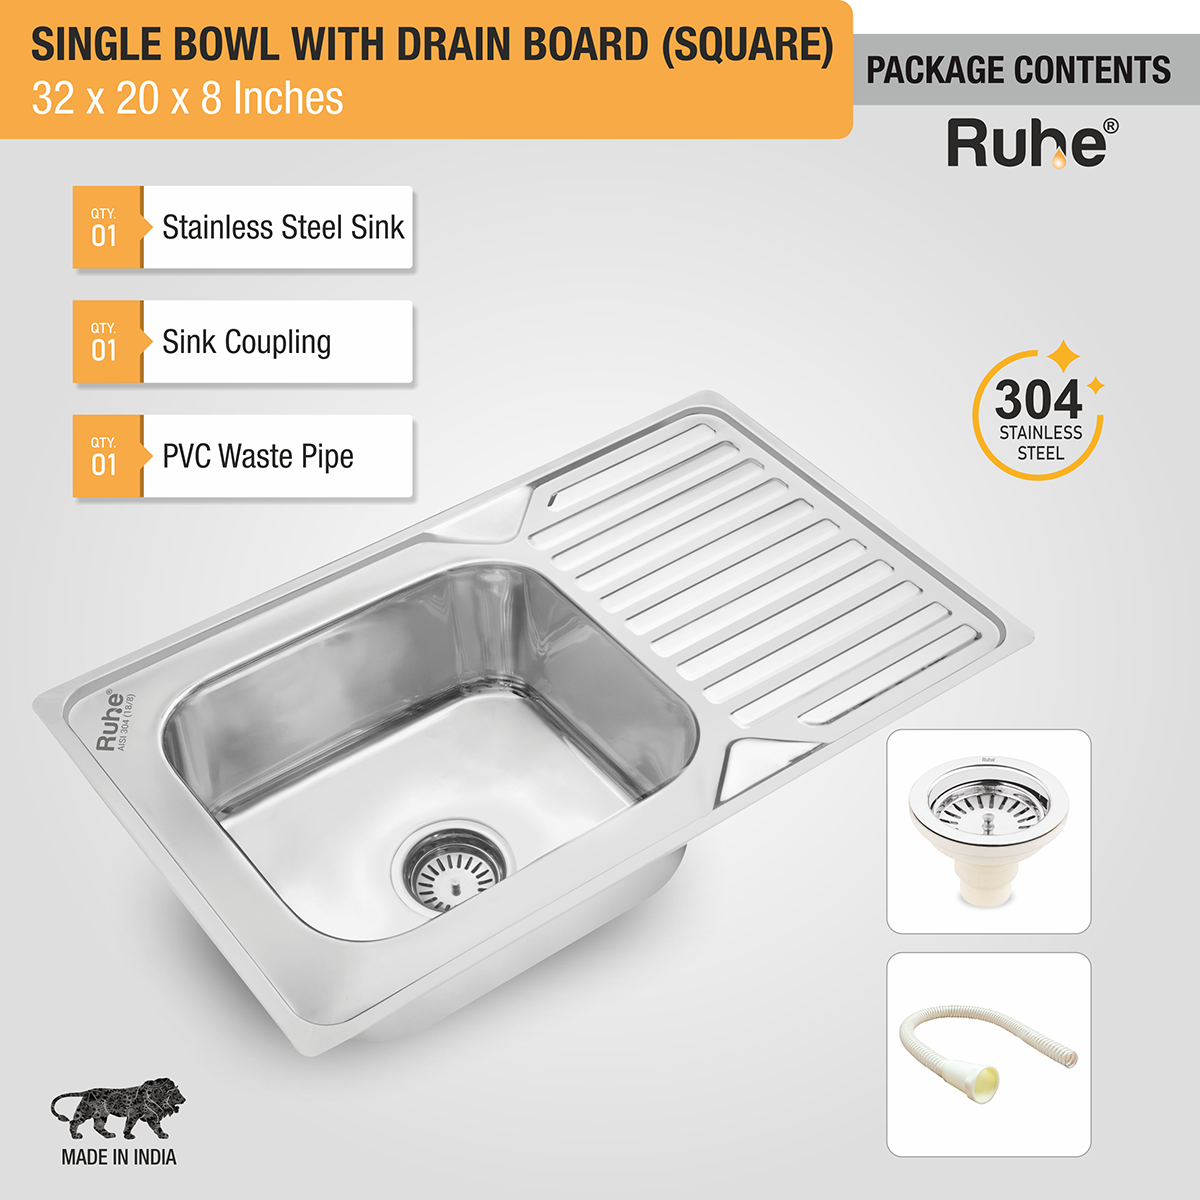 Square Single Bowl (32 x 20 x 8 inches) 304-Grade Stainless Steel Kitchen Sink with Drainboard with sink coupling, waste pipe